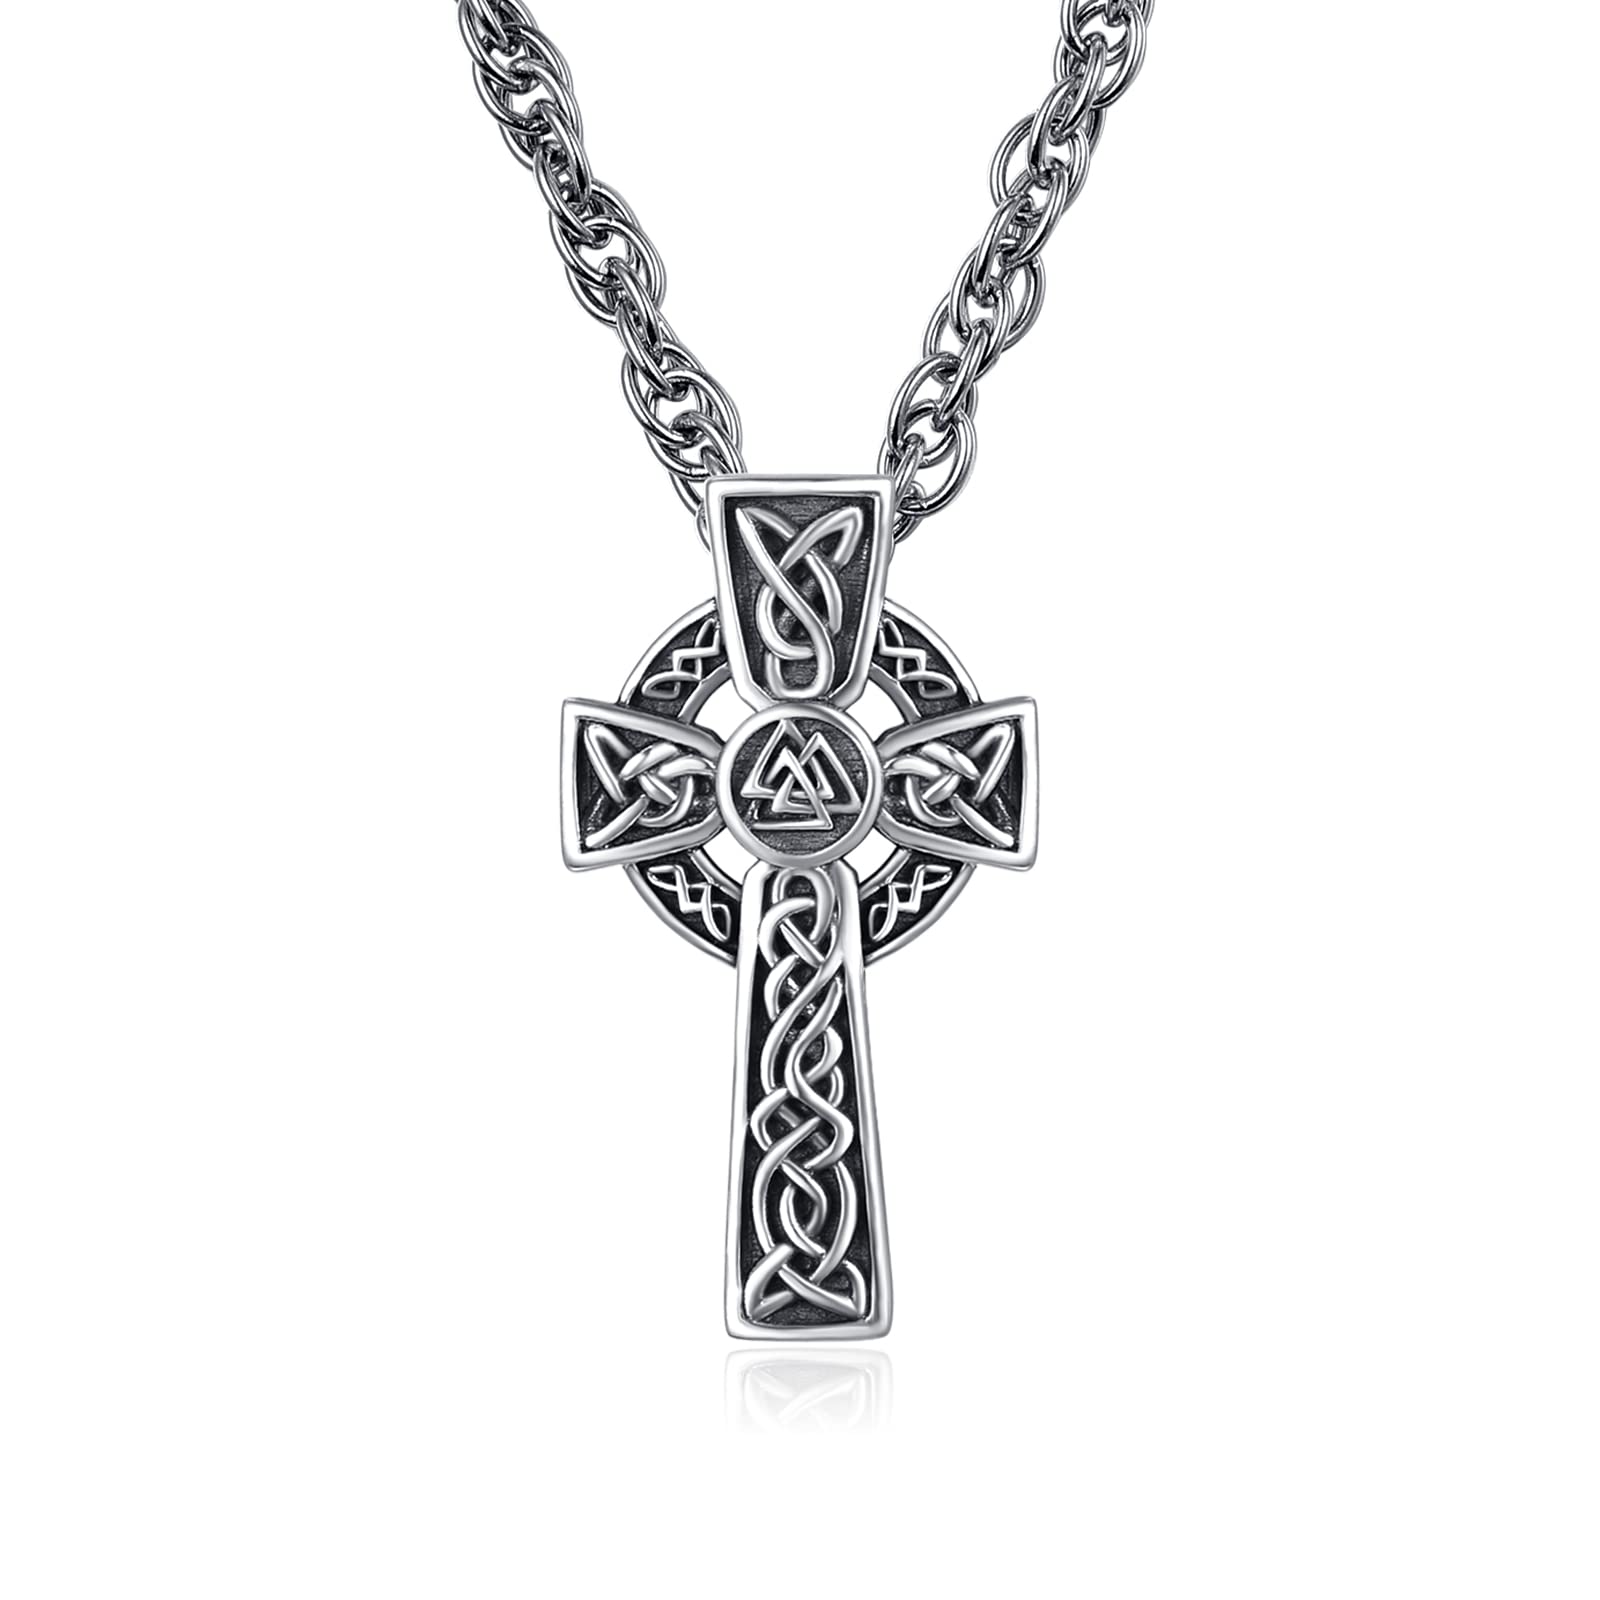 Celtic Knot Necklace Irish 925 Sterling Silver Religious Cross Protective Triquetra Trinity Triangle Pendant Necklace Jewellery for Men Women